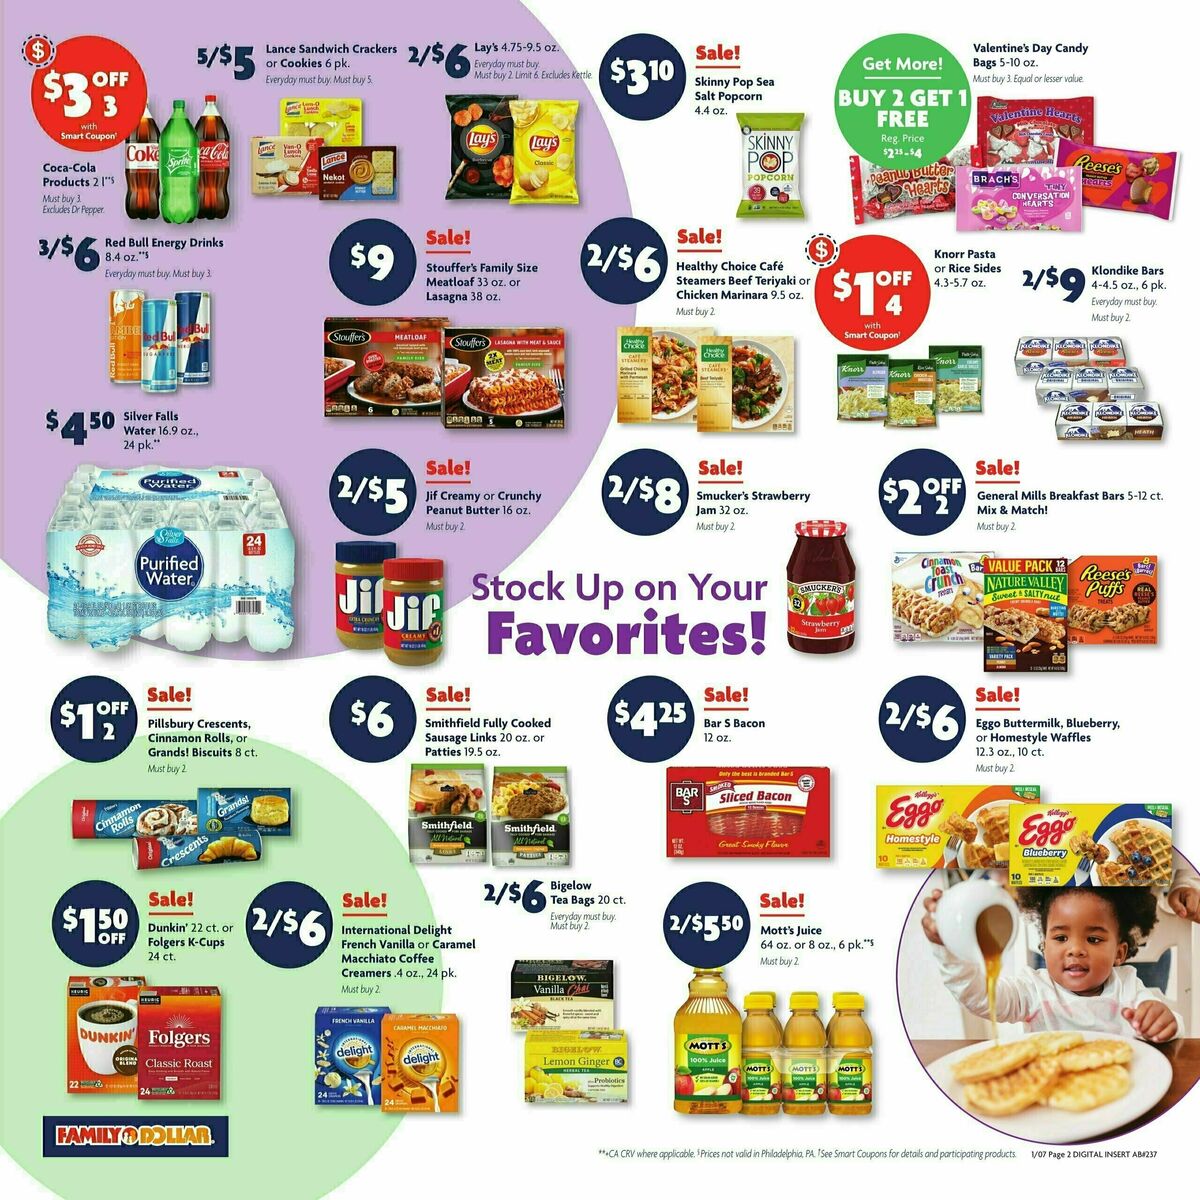 Family Dollar Weekly Ad from January 7